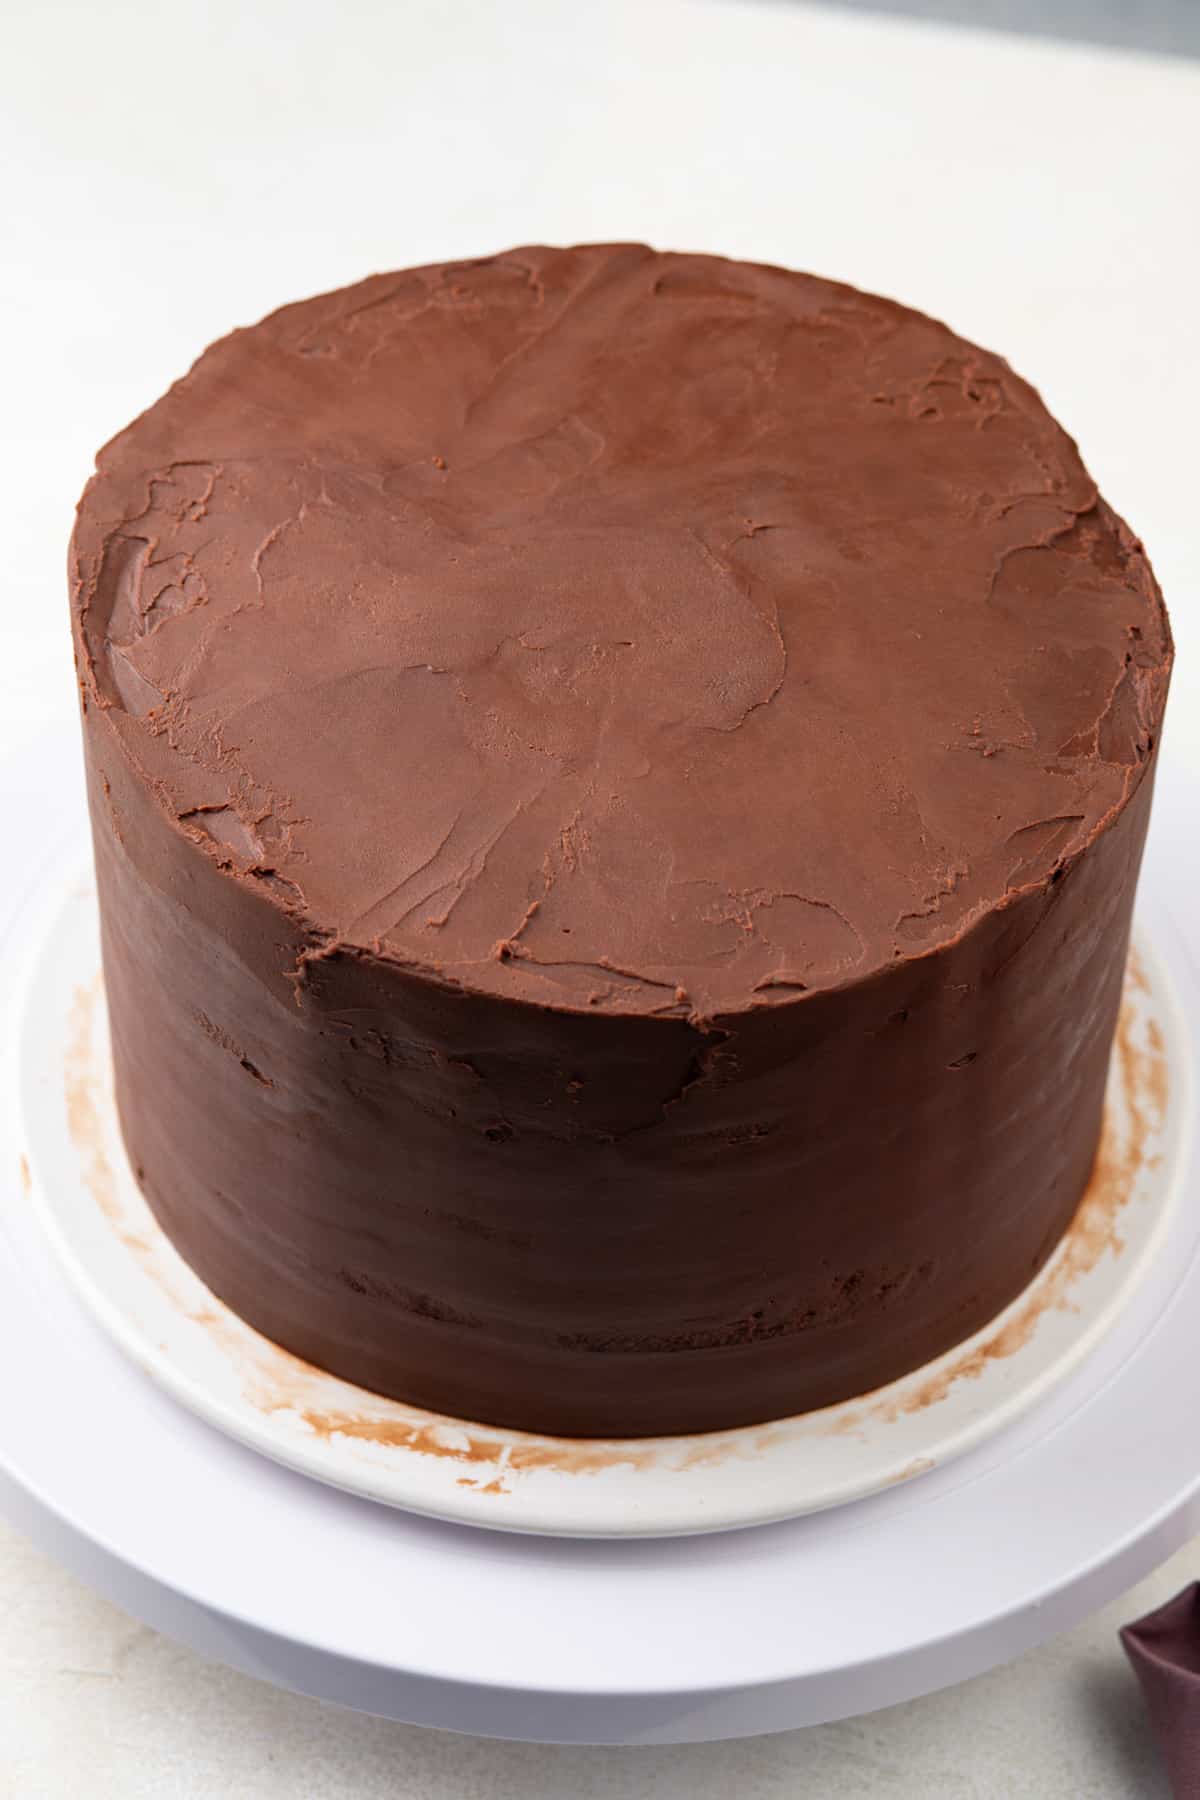 Chocolate guinness cake being coated with chocolate ganache frosting.